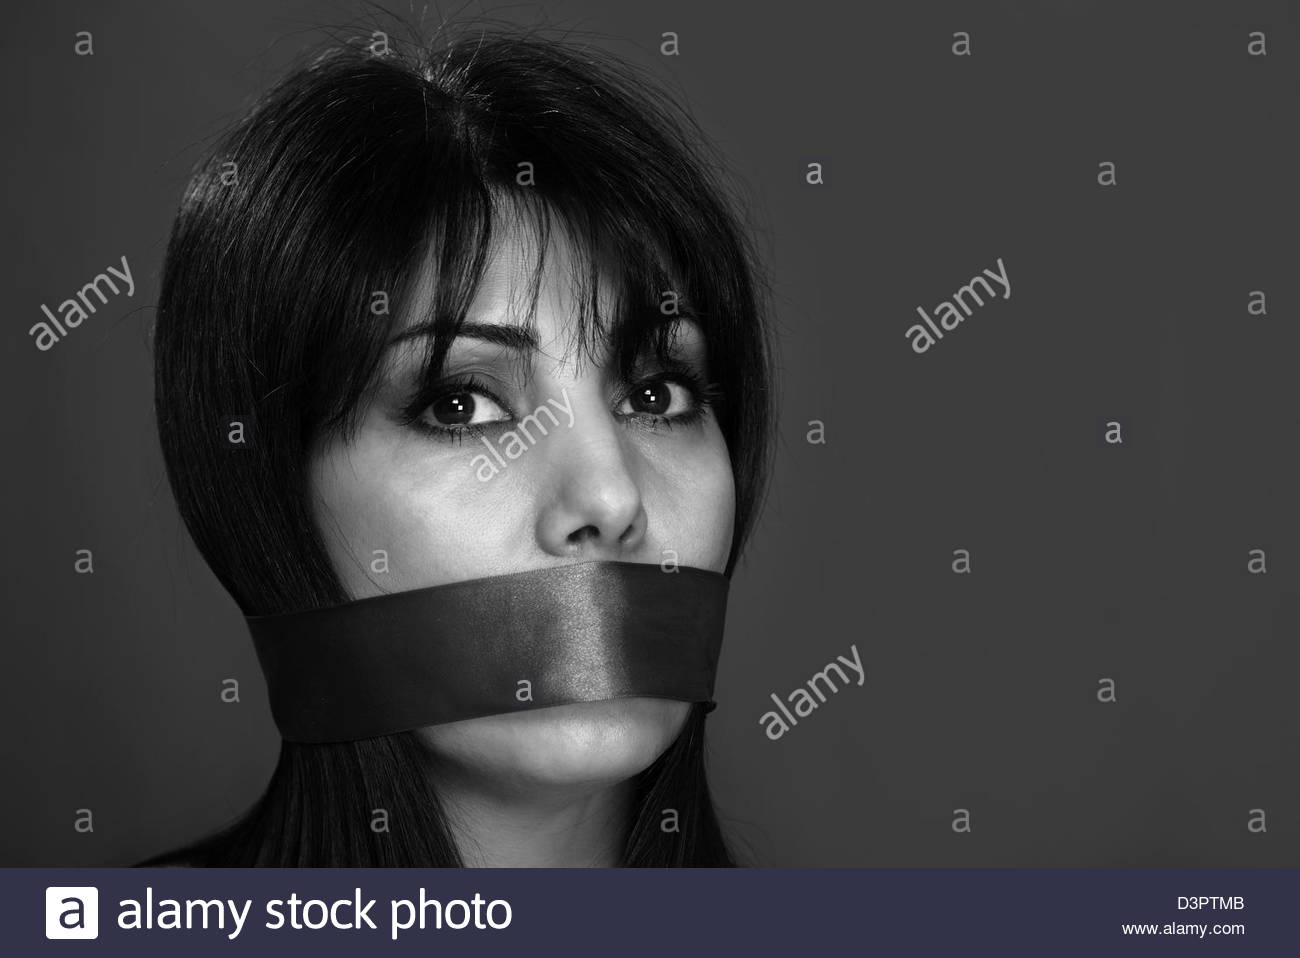 Gagged Mouth Stockfotos And Gagged Mouth Bilder Alamy 